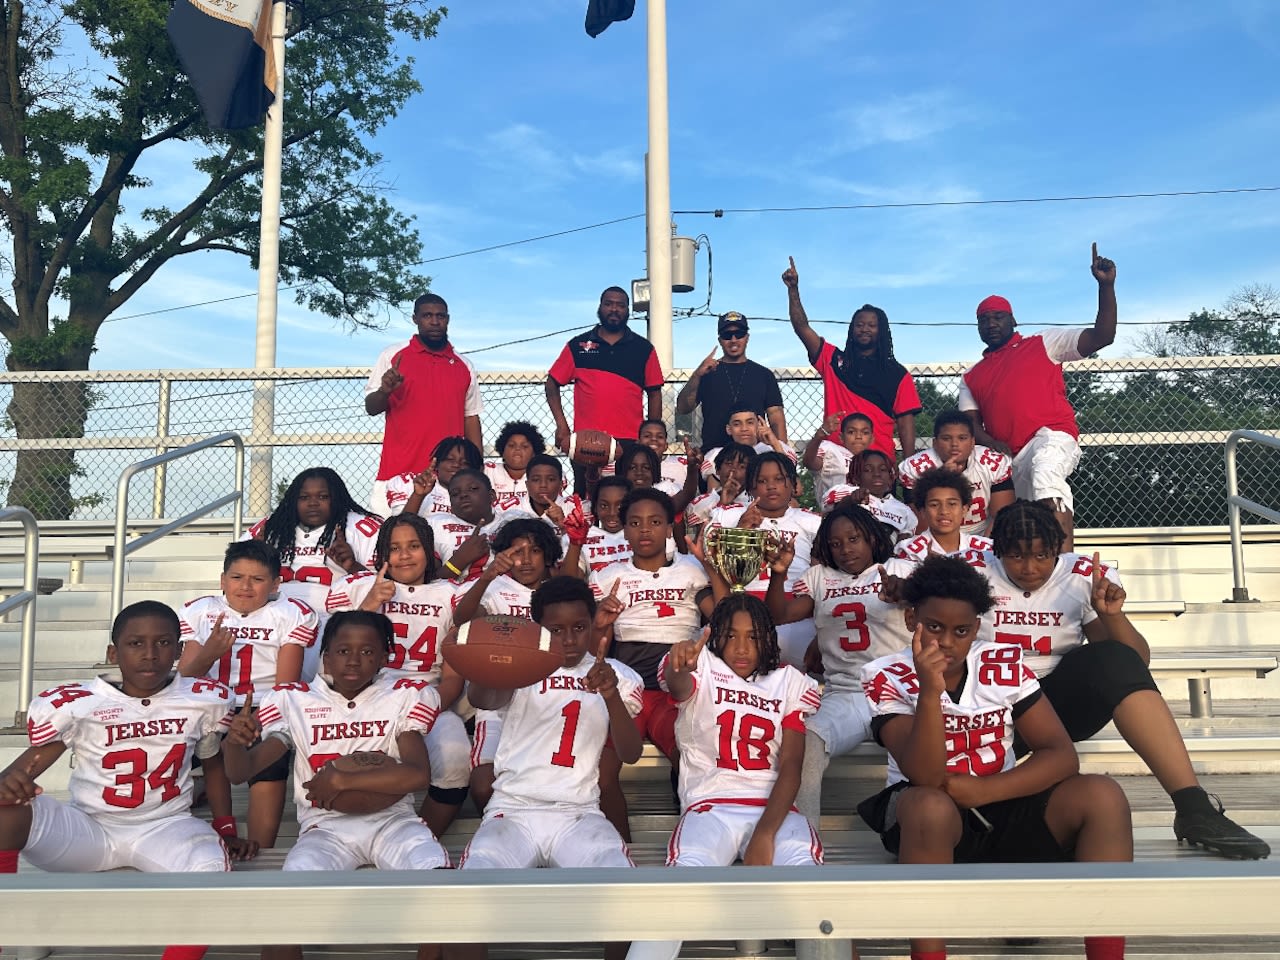 Jersey City youth football team aims for national championship, but needs help getting there